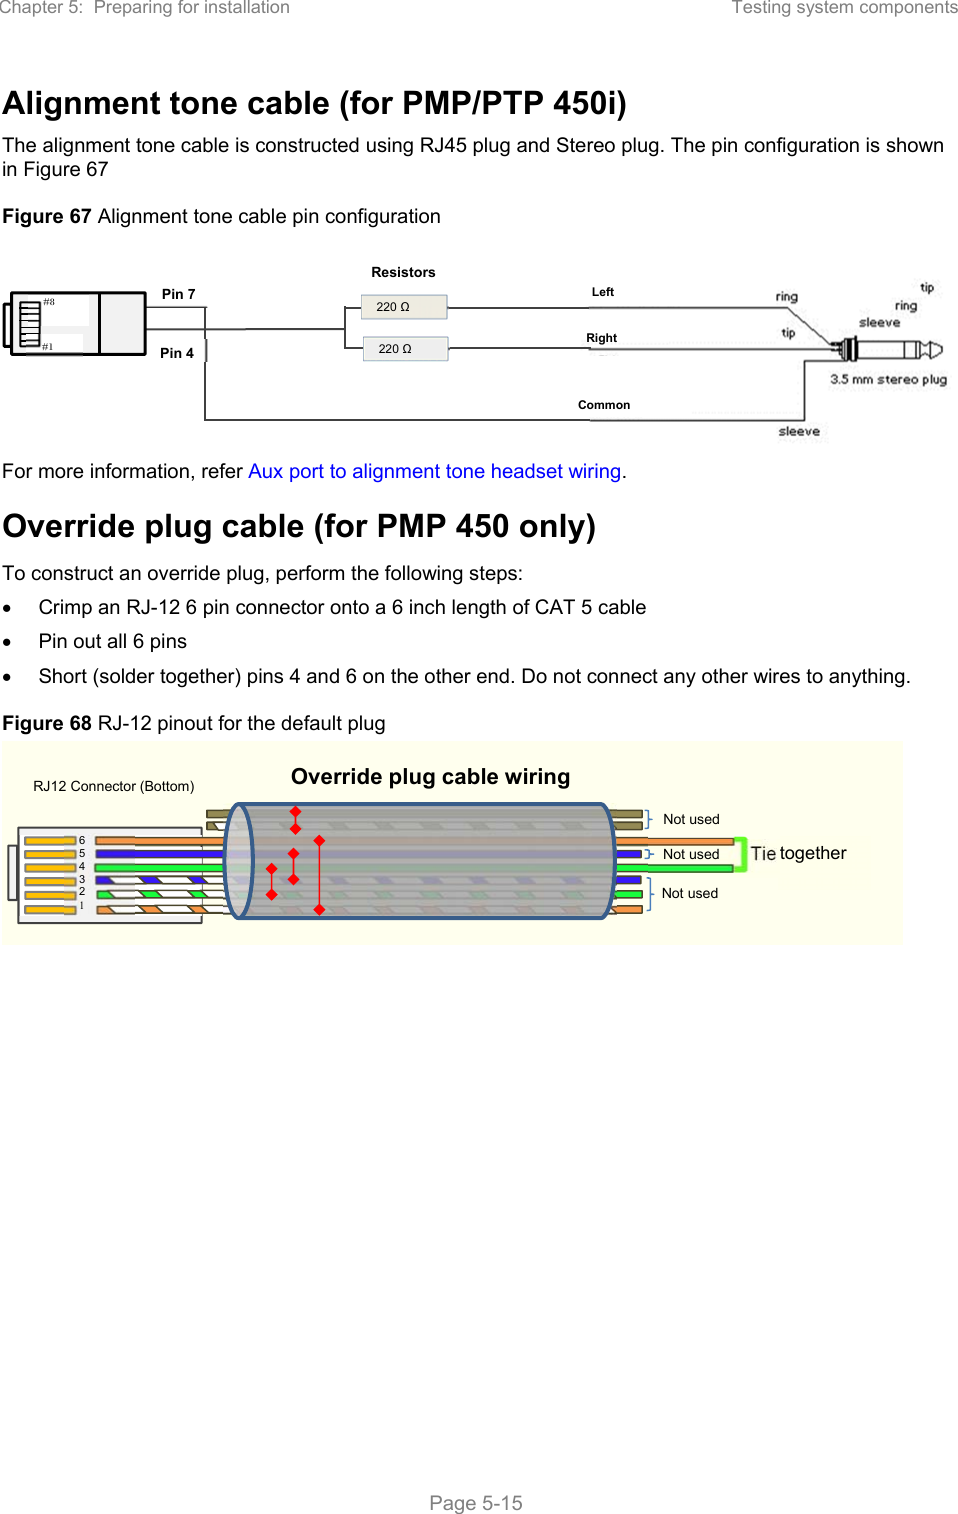 Chapter 5:  Preparing for installation  Testing system components   Page 5-15 Alignment tone cable (for PMP/PTP 450i) The alignment tone cable is constructed using RJ45 plug and Stereo plug. The pin configuration is shown in Figure 67 Figure 67 Alignment tone cable pin configuration  For more information, refer Aux port to alignment tone headset wiring. Override plug cable (for PMP 450 only) To construct an override plug, perform the following steps:   Crimp an RJ-12 6 pin connector onto a 6 inch length of CAT 5 cable   Pin out all 6 pins   Short (solder together) pins 4 and 6 on the other end. Do not connect any other wires to anything.  Figure 68 RJ-12 pinout for the default plug  220 Ω 220 Ω Resistors Pin 7 Pin 4 LeftRight   Common#8 #1 `` RJ12 Connector (Bottom) Override plug cable wiring6  5 4 3 2 1 Tie together Not used Not used Not used 